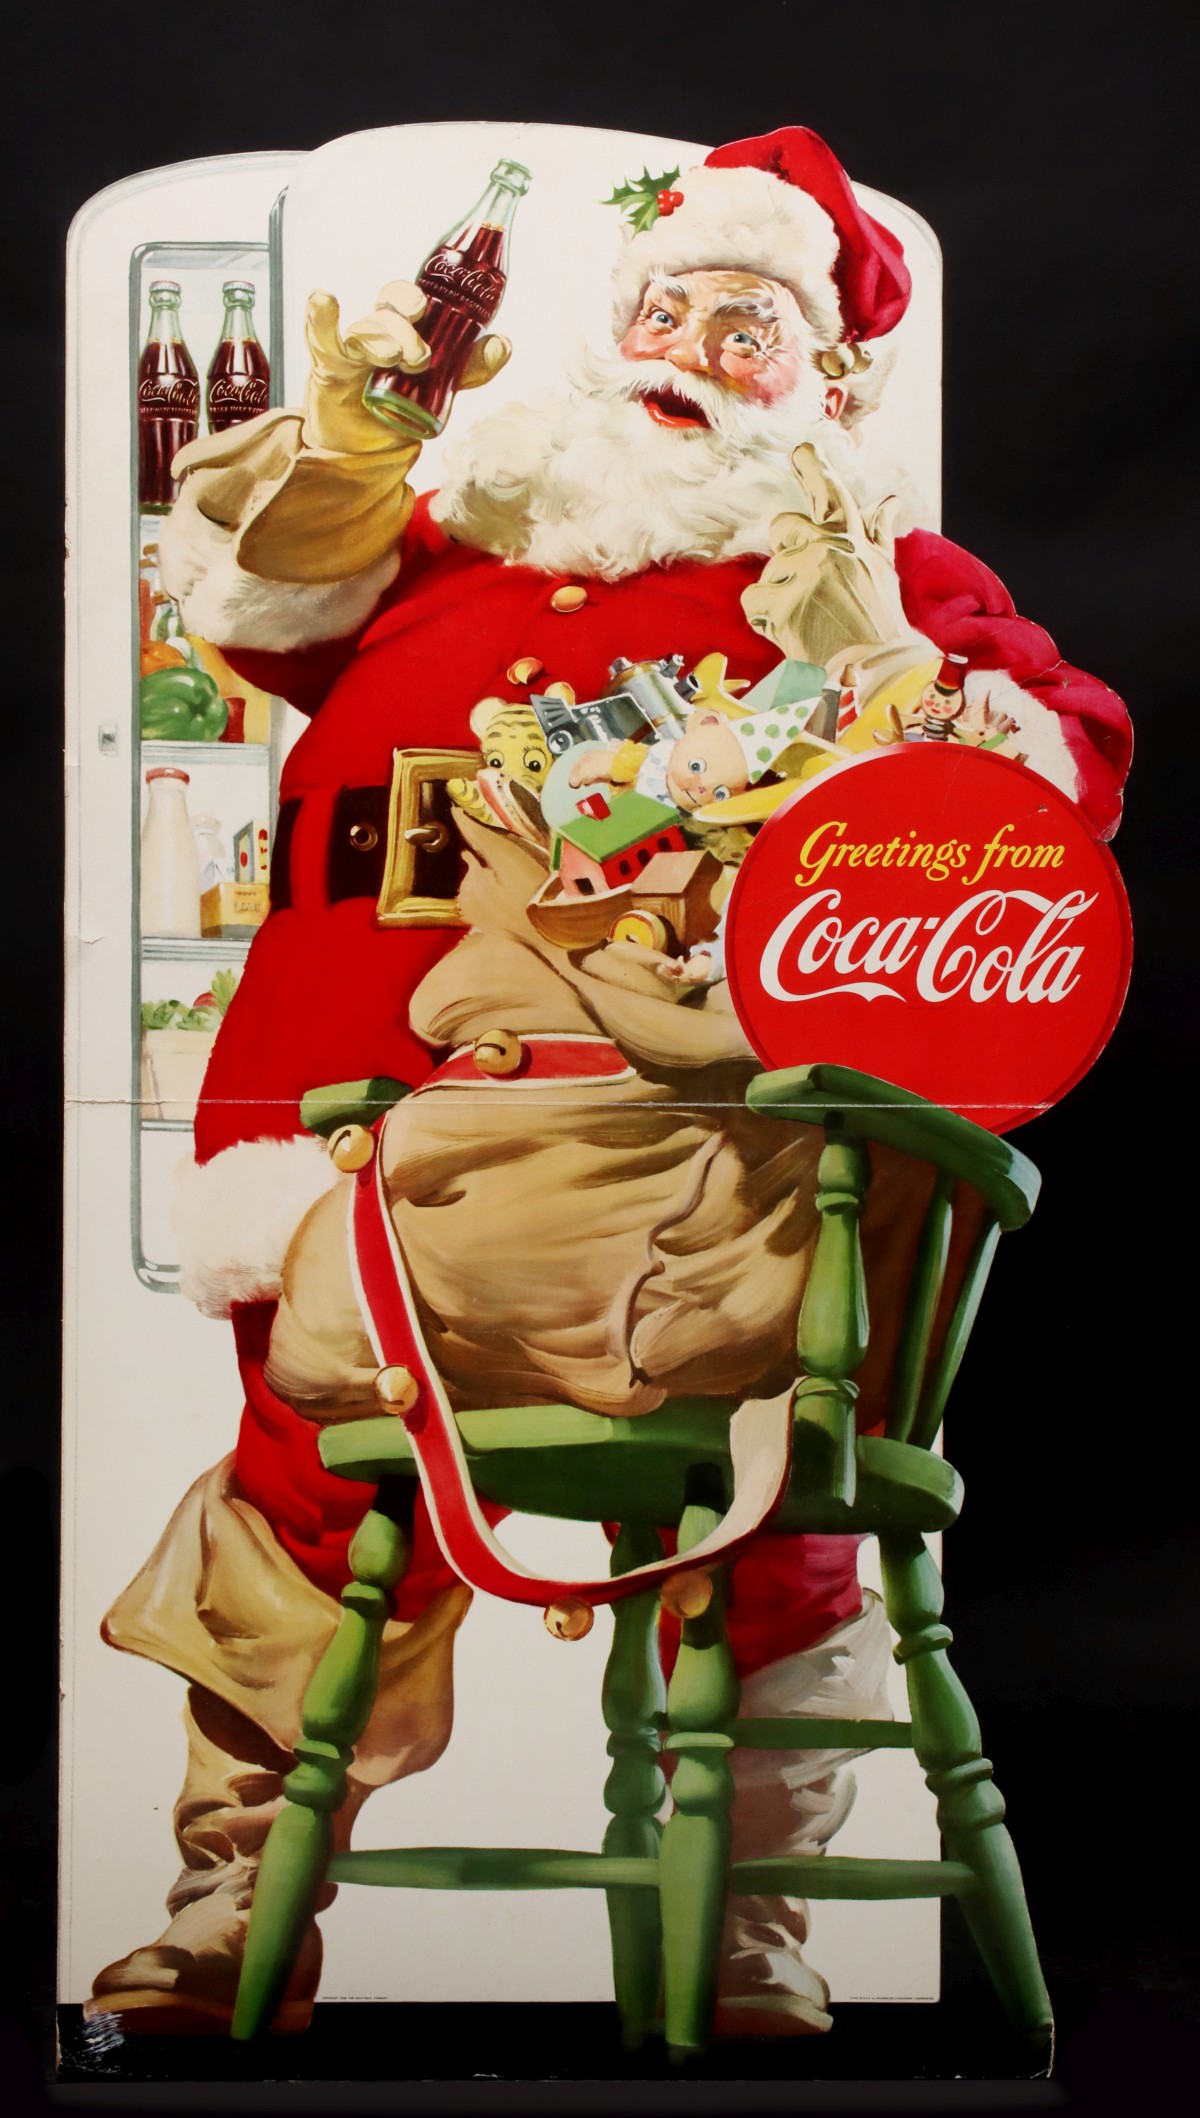 A 1948 COCA-COLA ADVERTISING STAND-UP WITH SANTA CLAUS